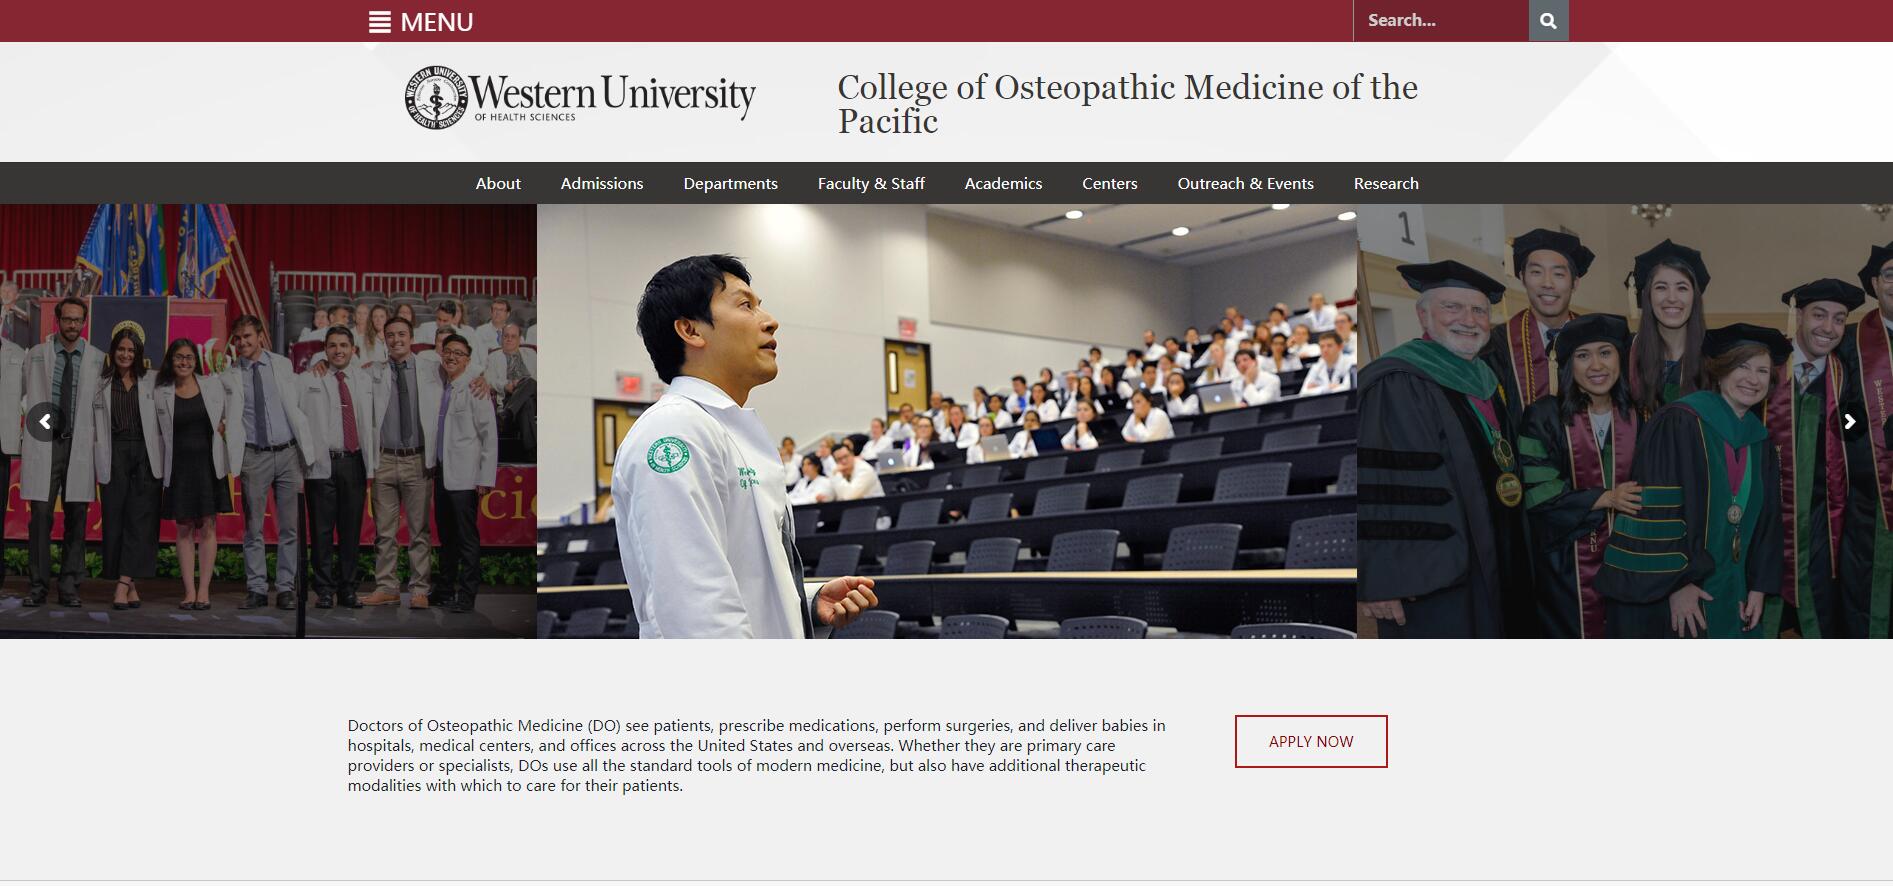 The College of Osteopathic Medicine of the Pacific at Western University of Health Sciences